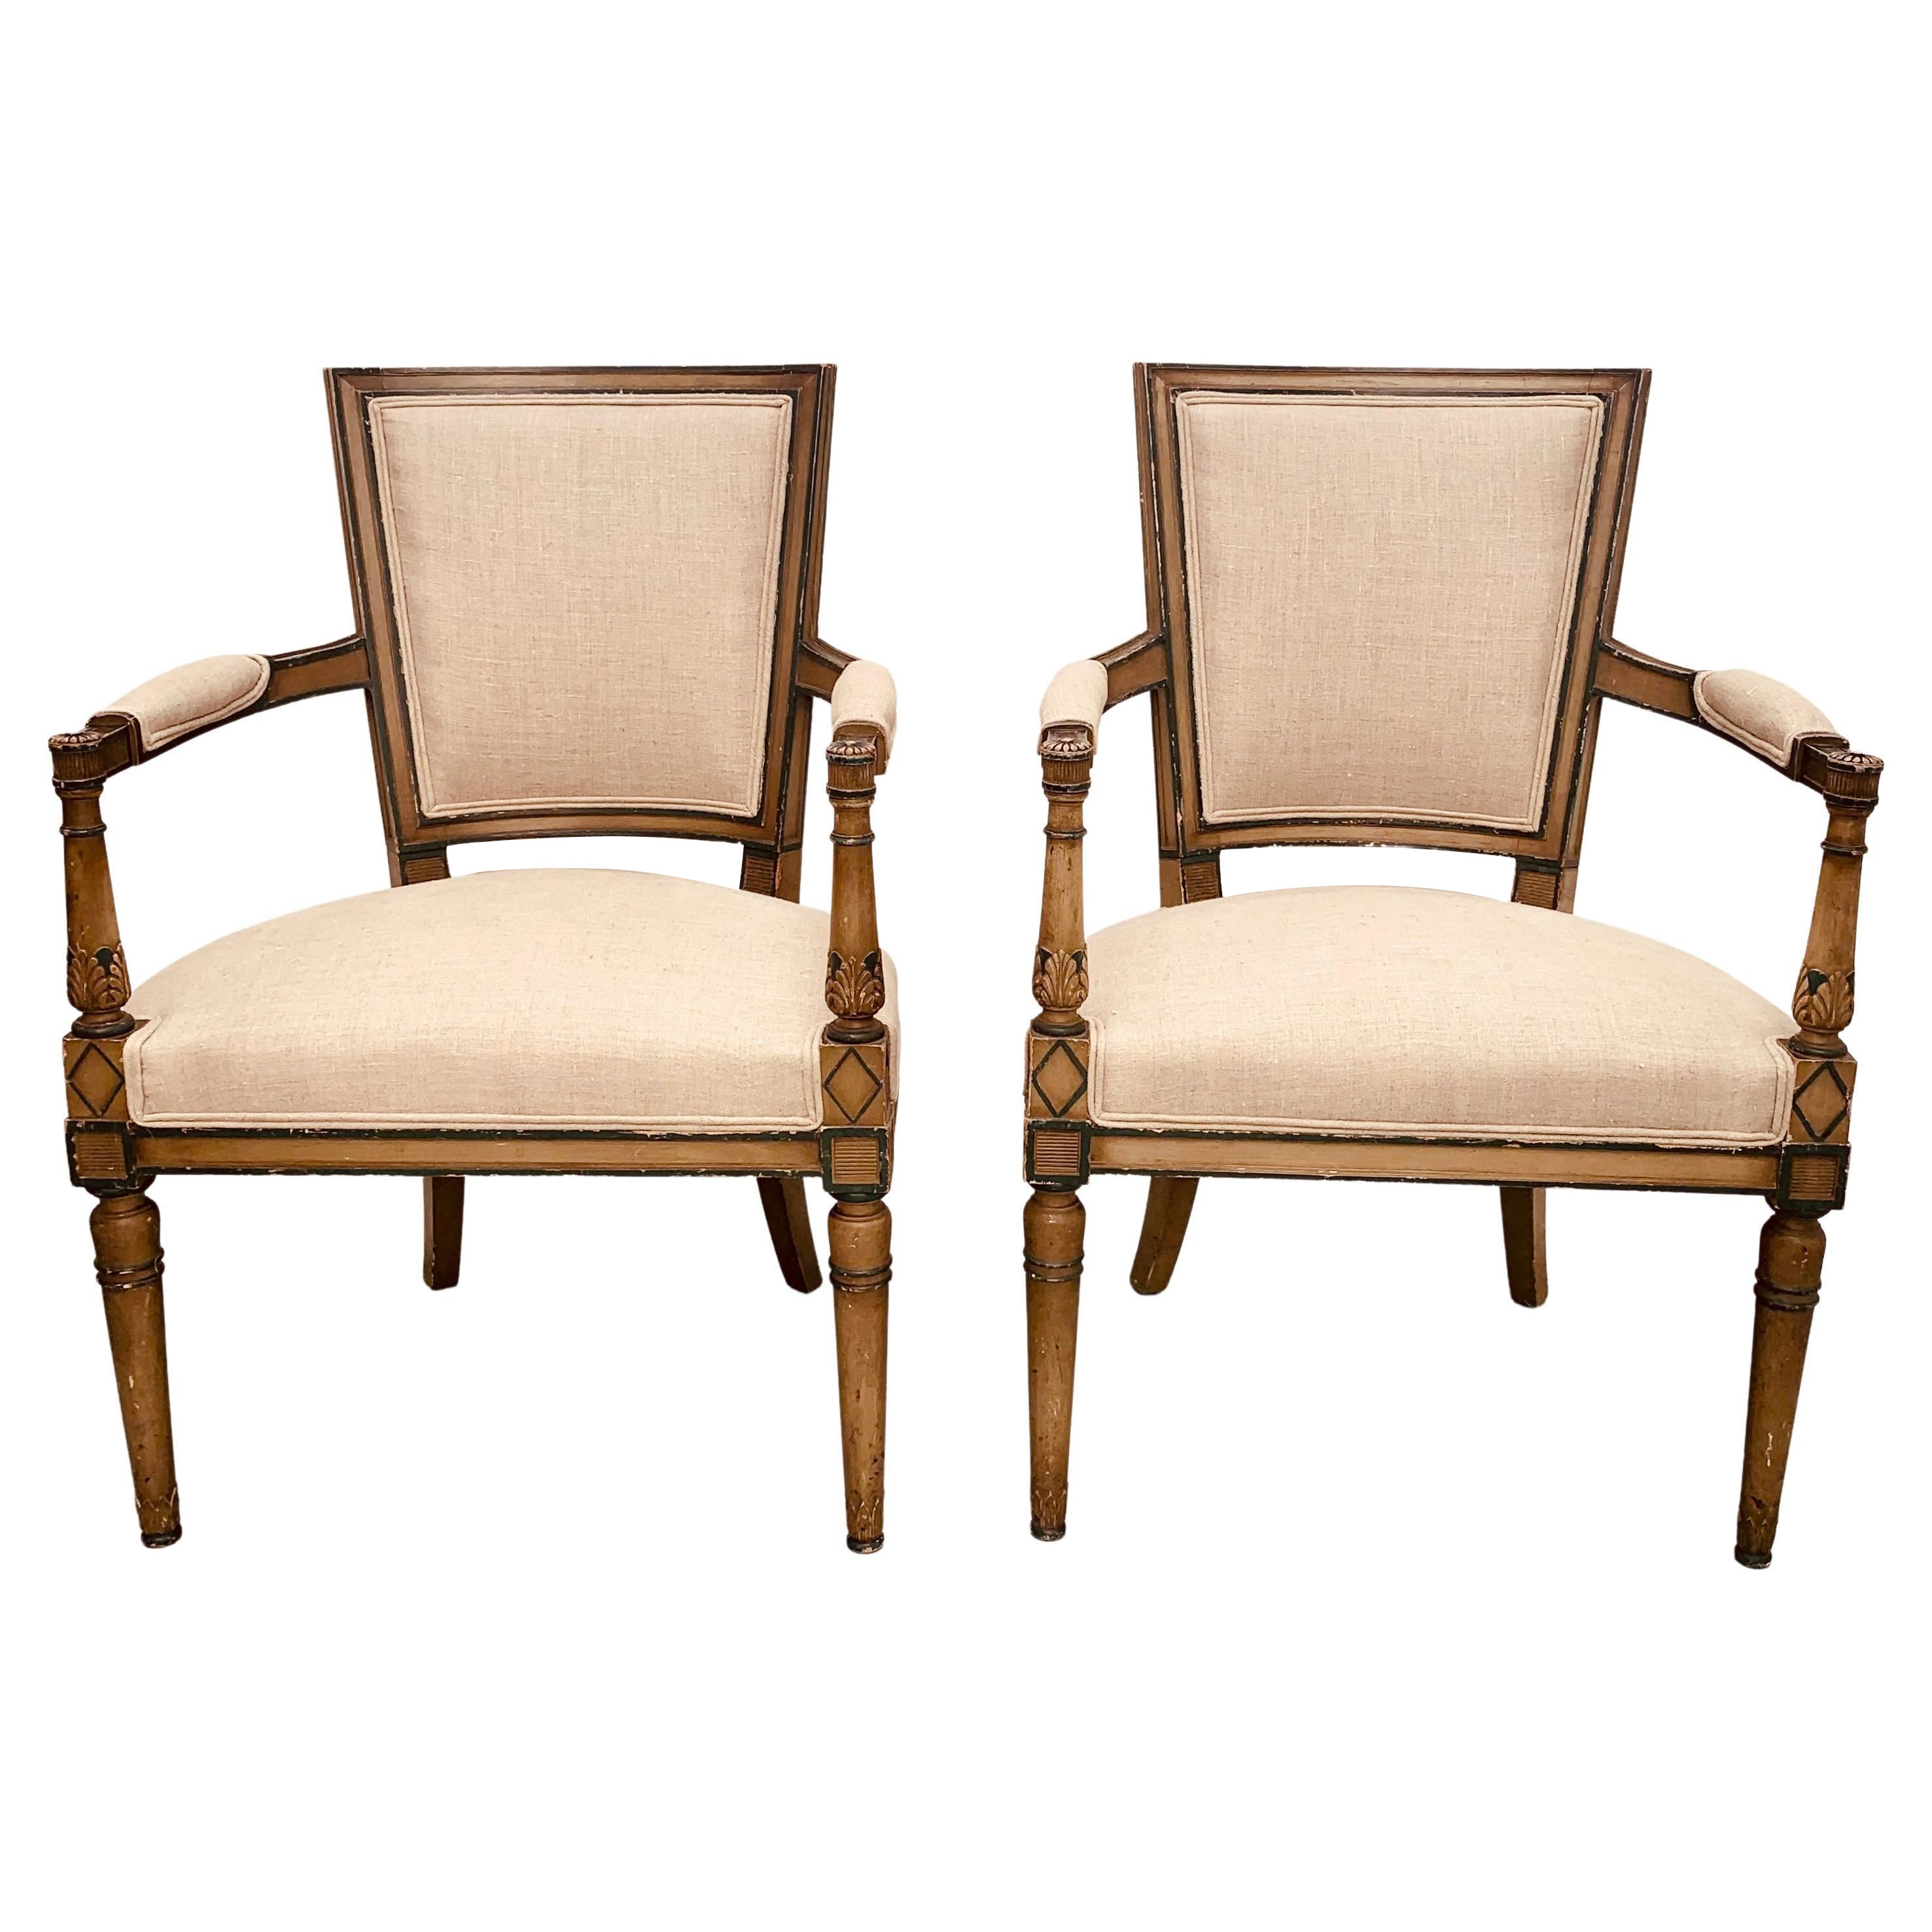 Pair of French Late 18th Century Carved & Original Painted Directoire Armchairs